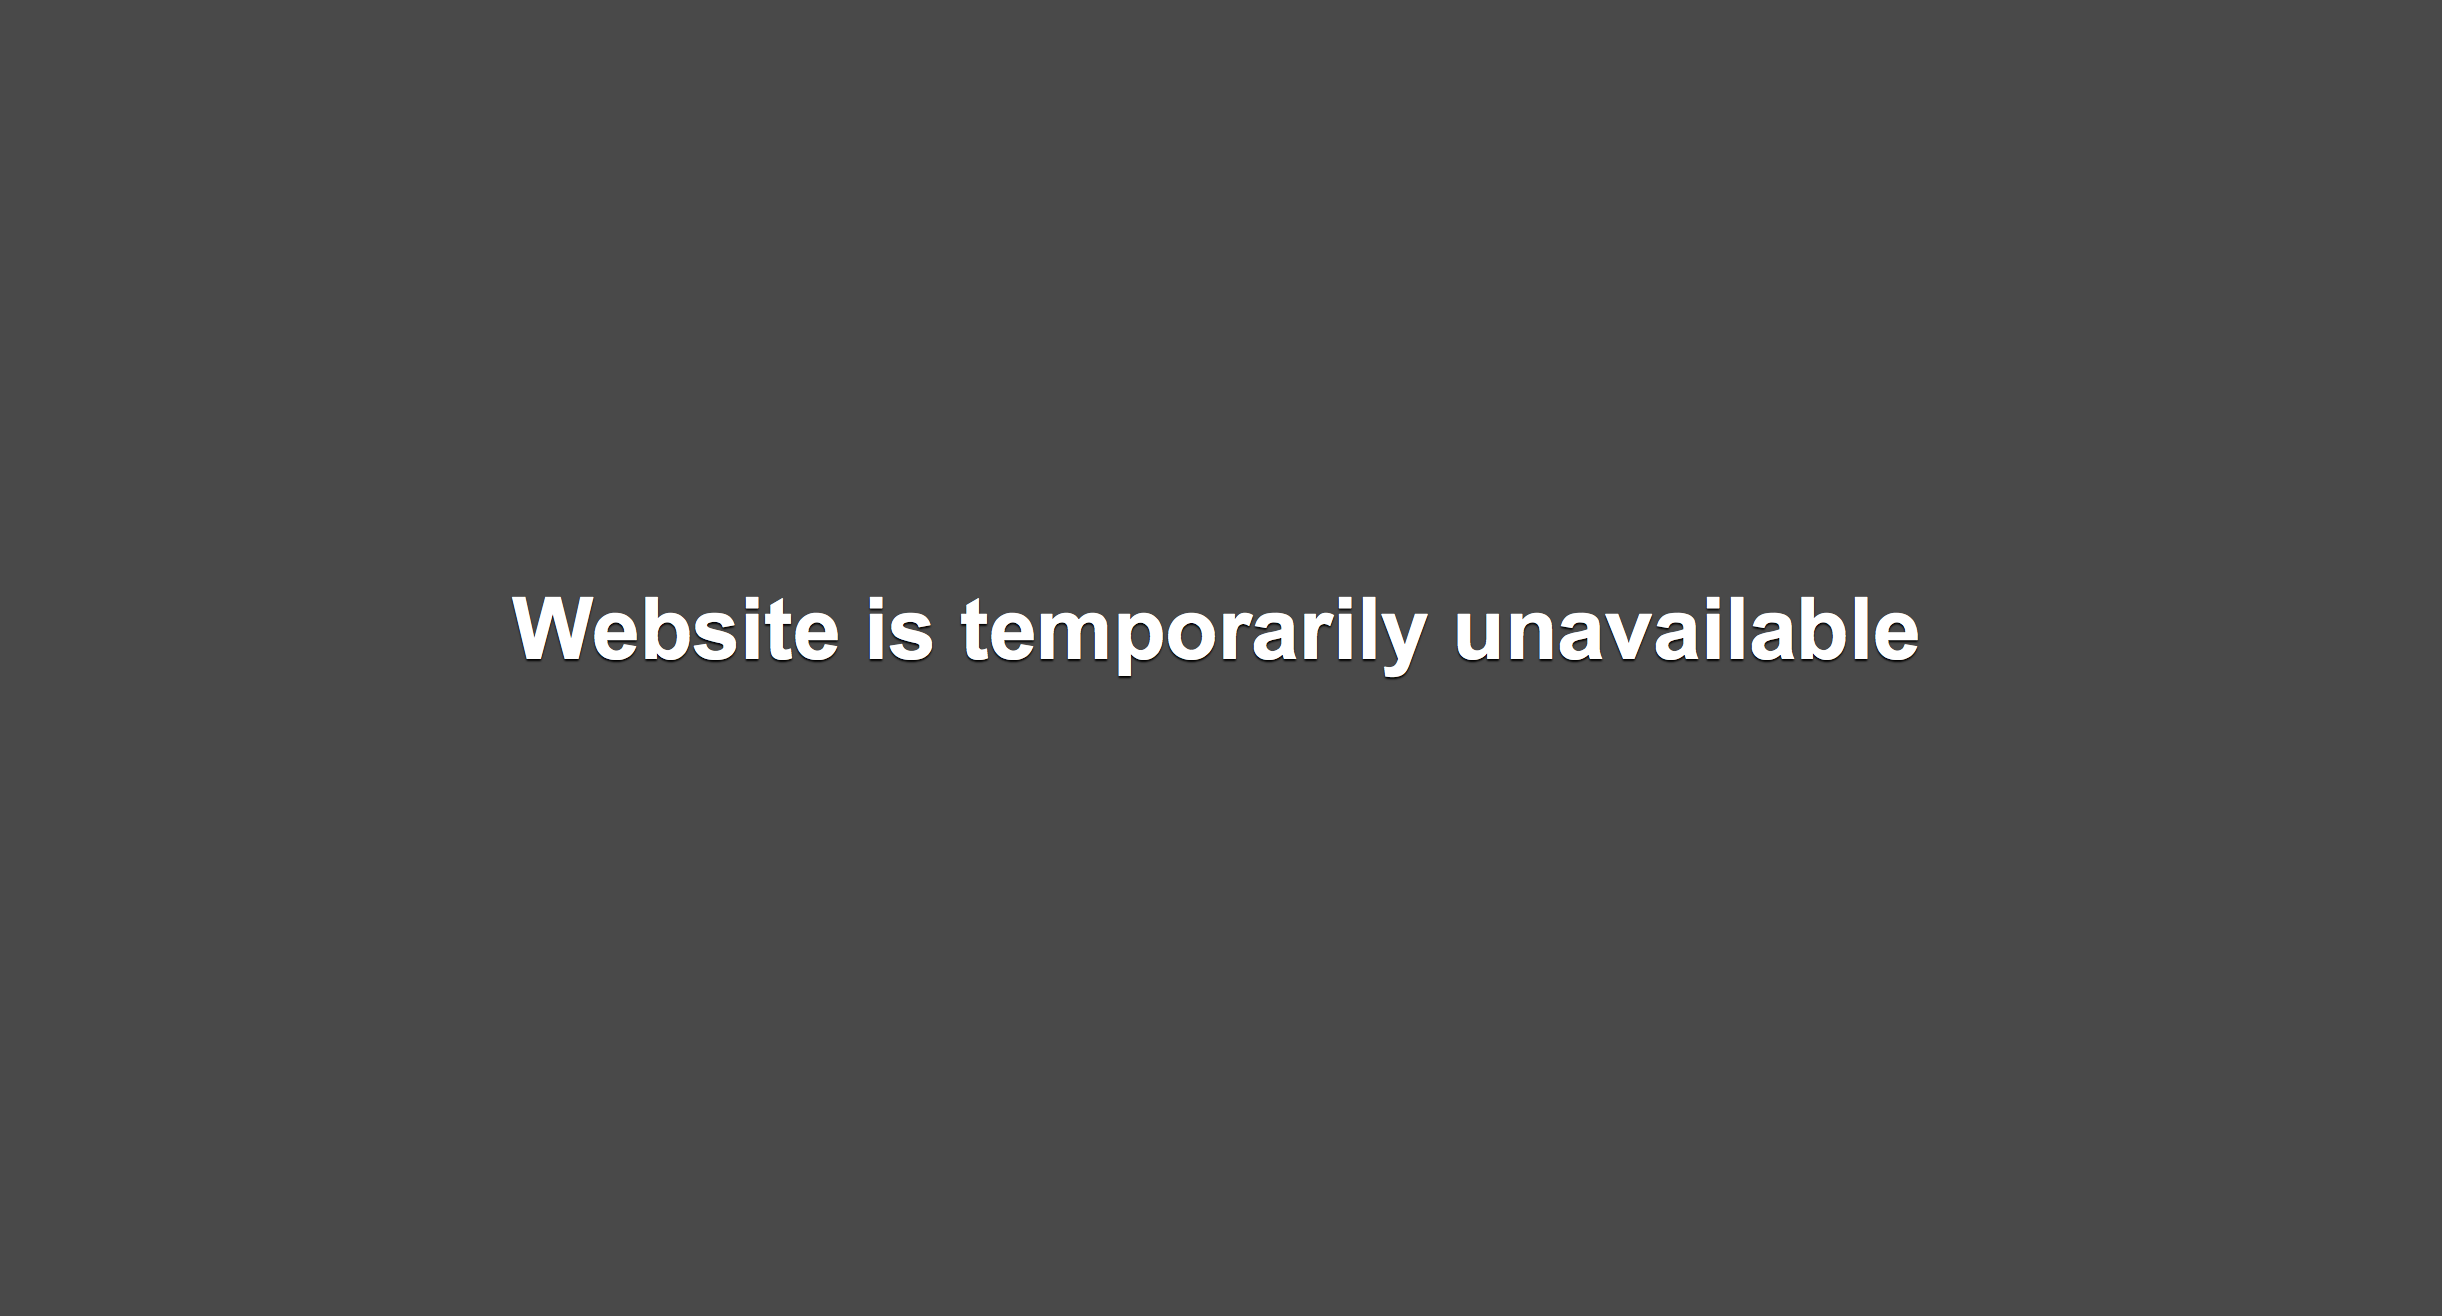 The website is gone, like our hopes.